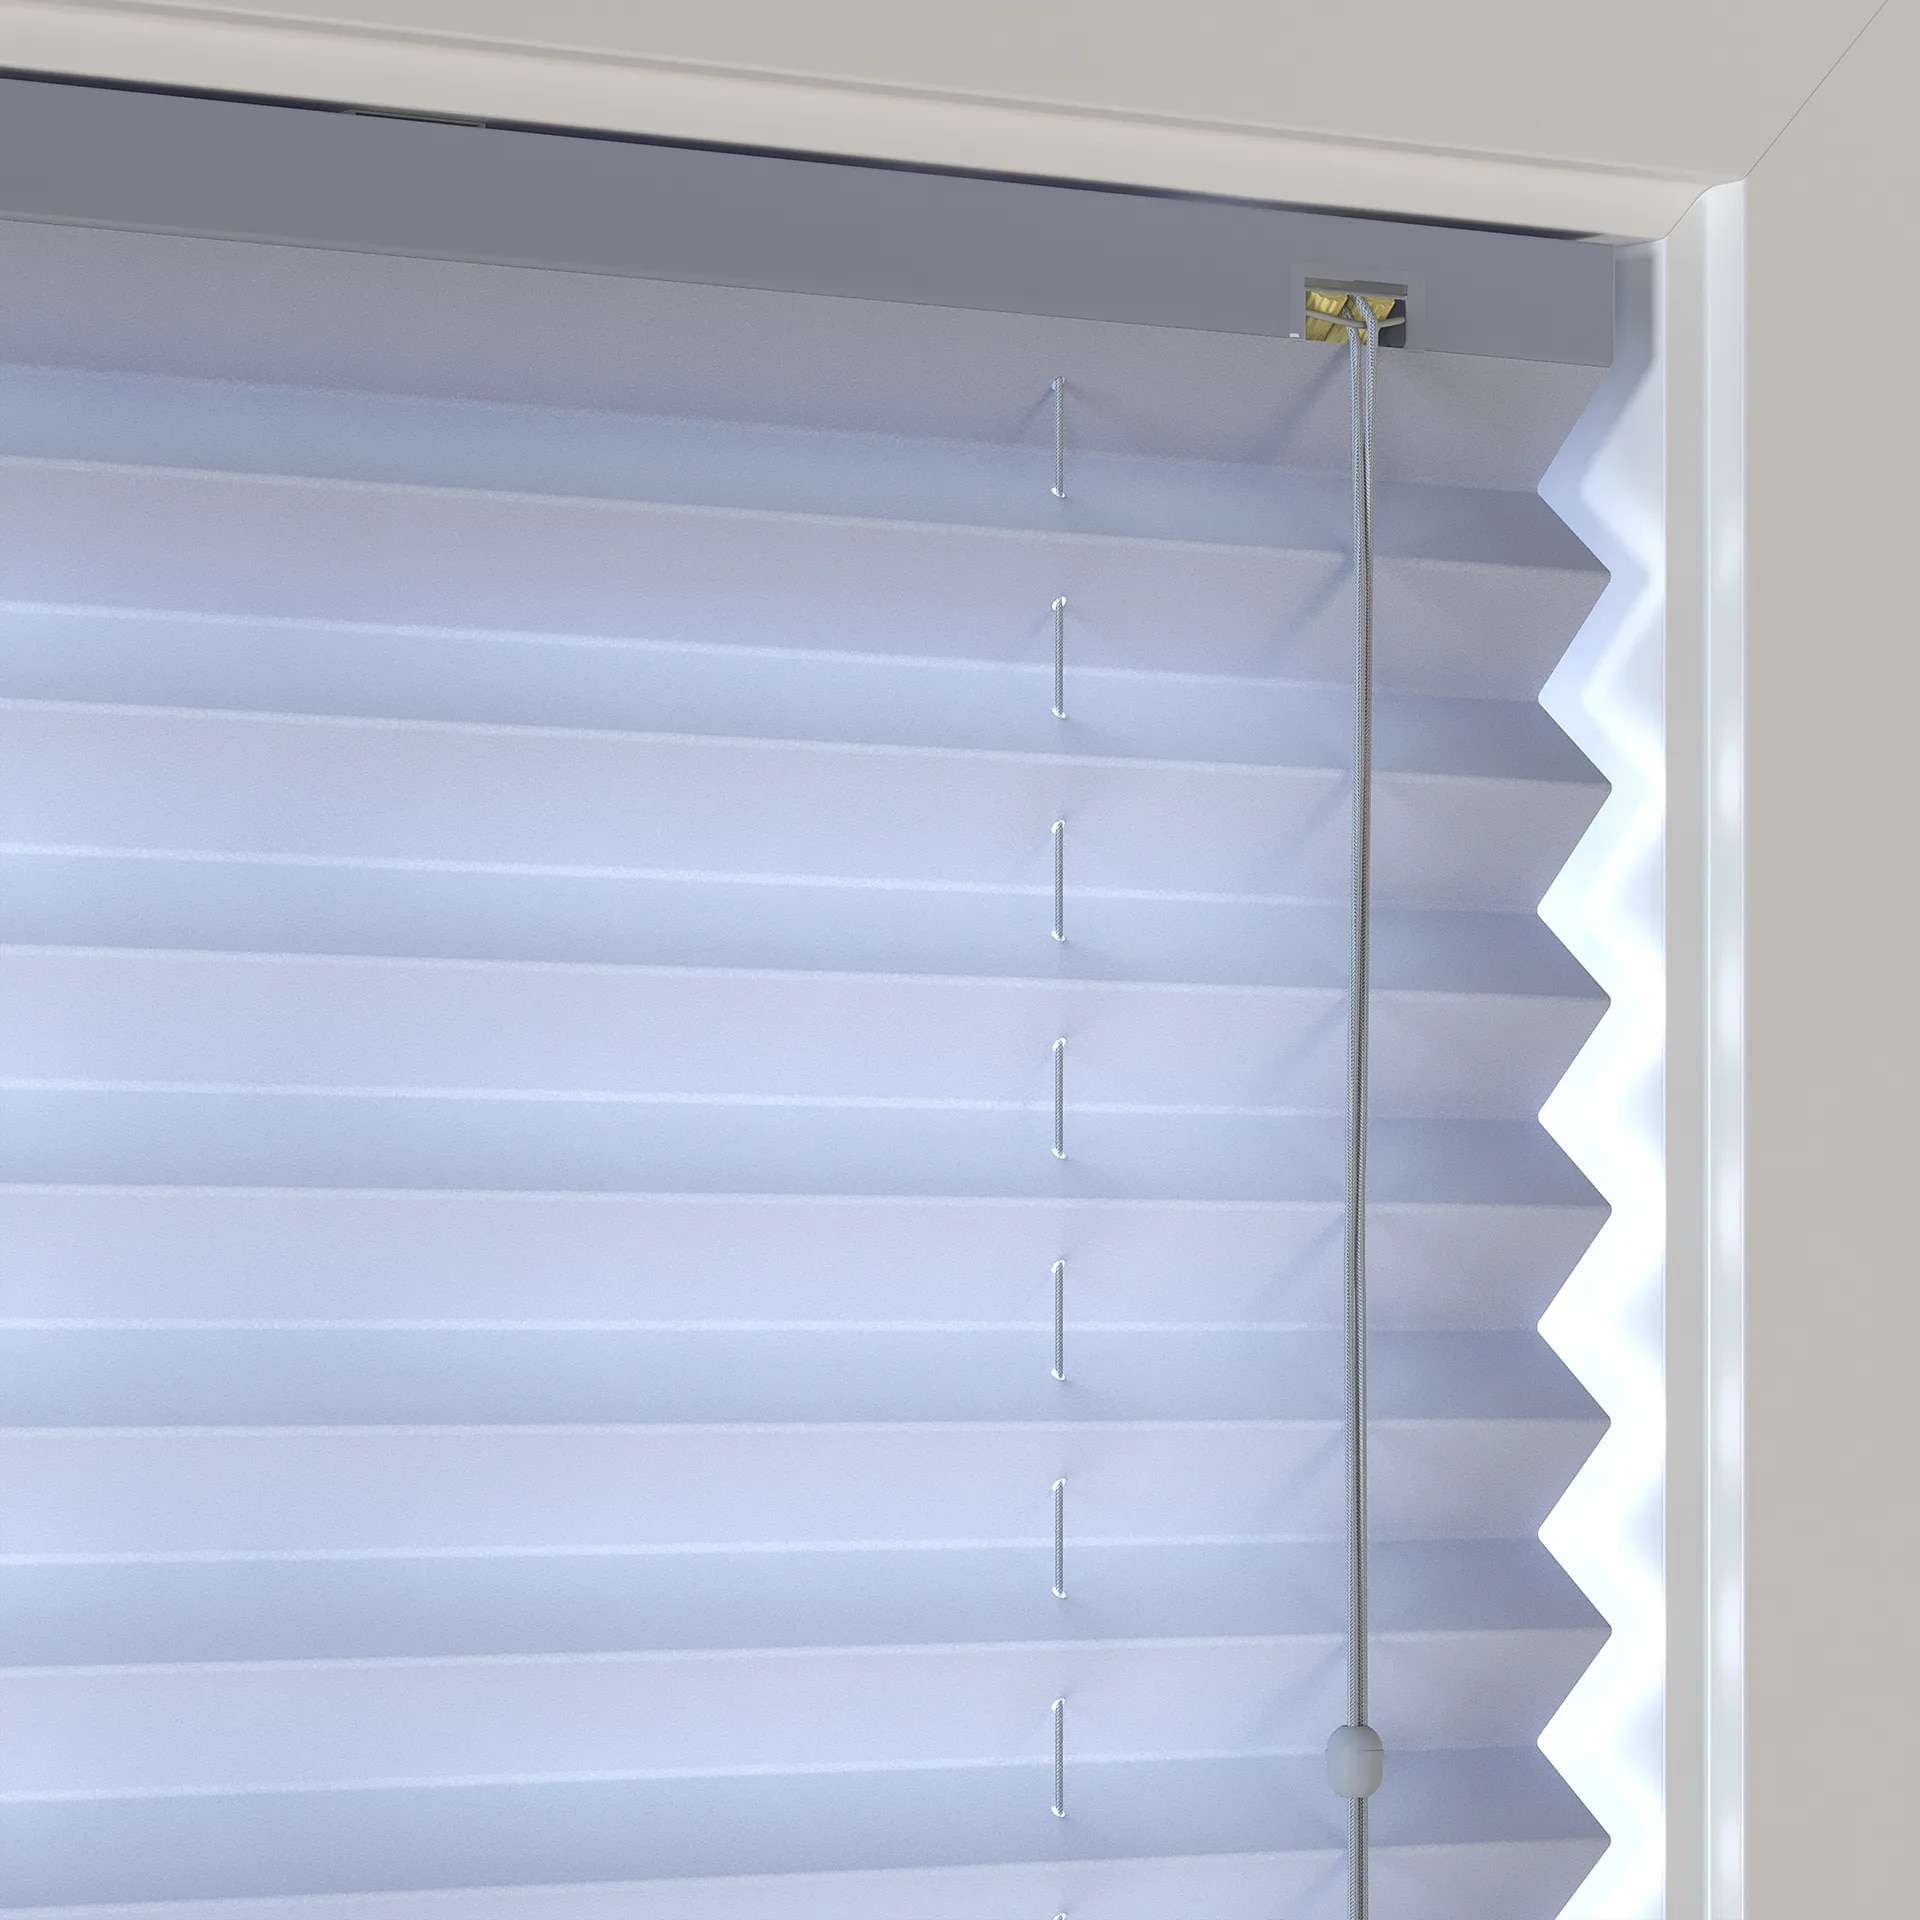 Standard Pleated Blinds